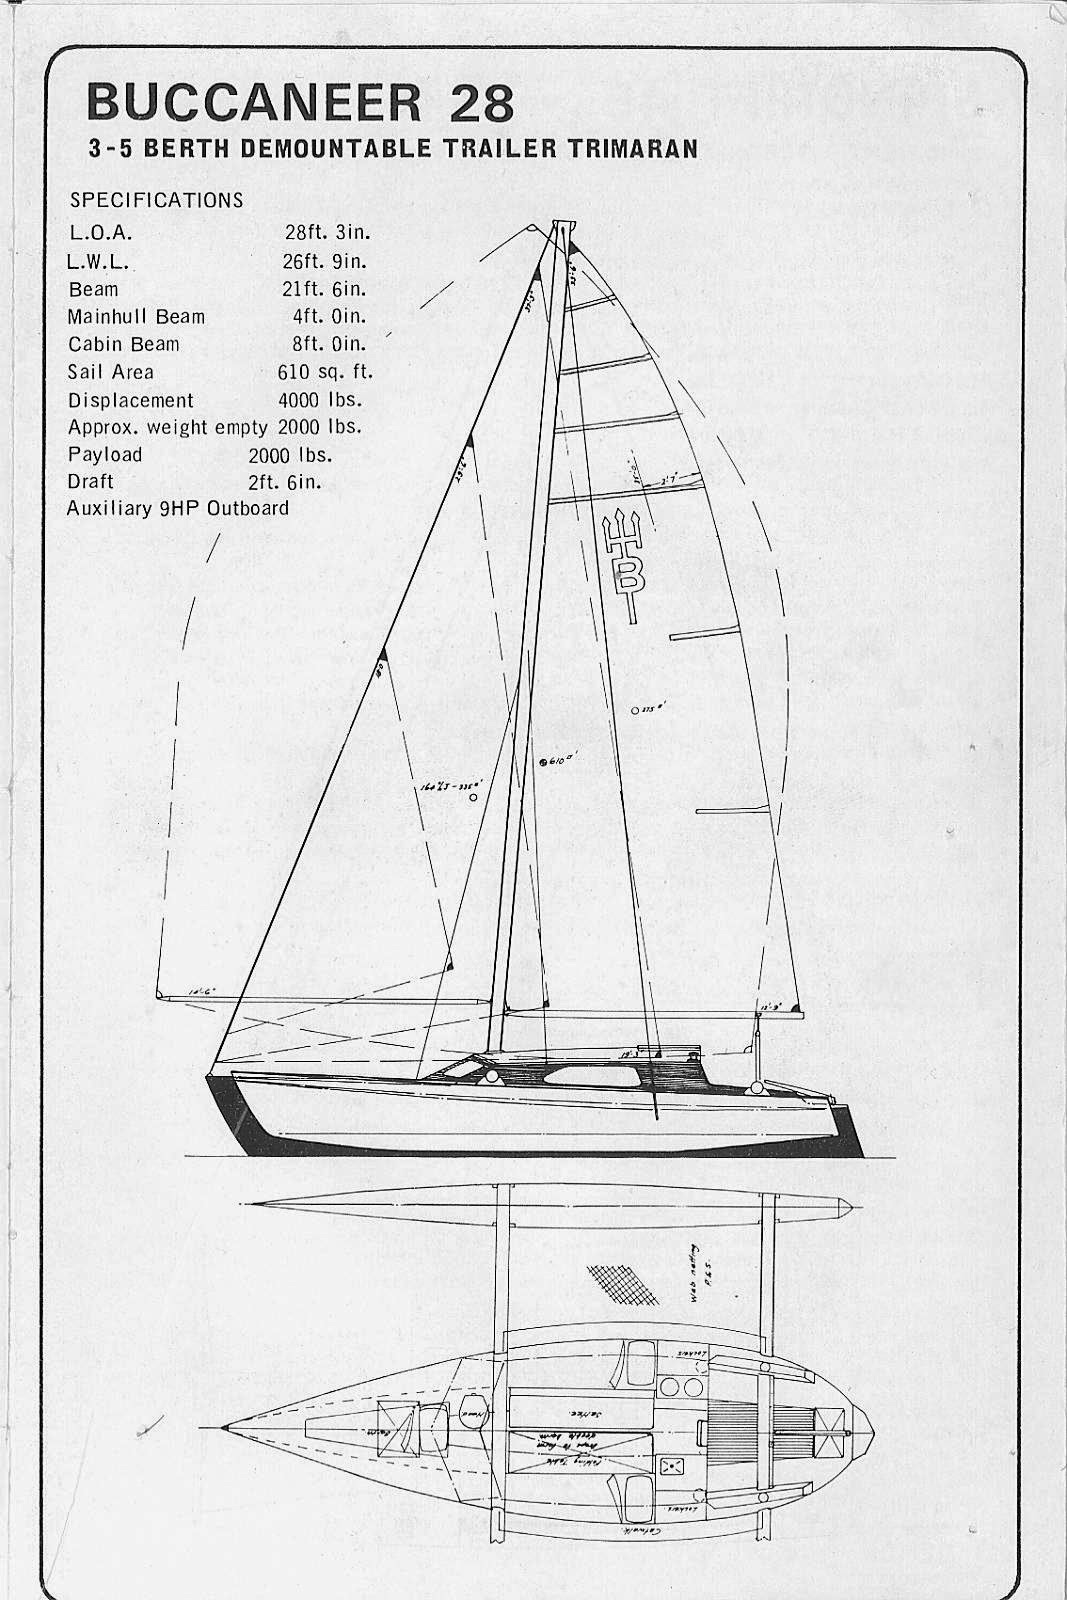  Projects and Multihull News: Lock Crowther Buccaneer 28 trimaran plans